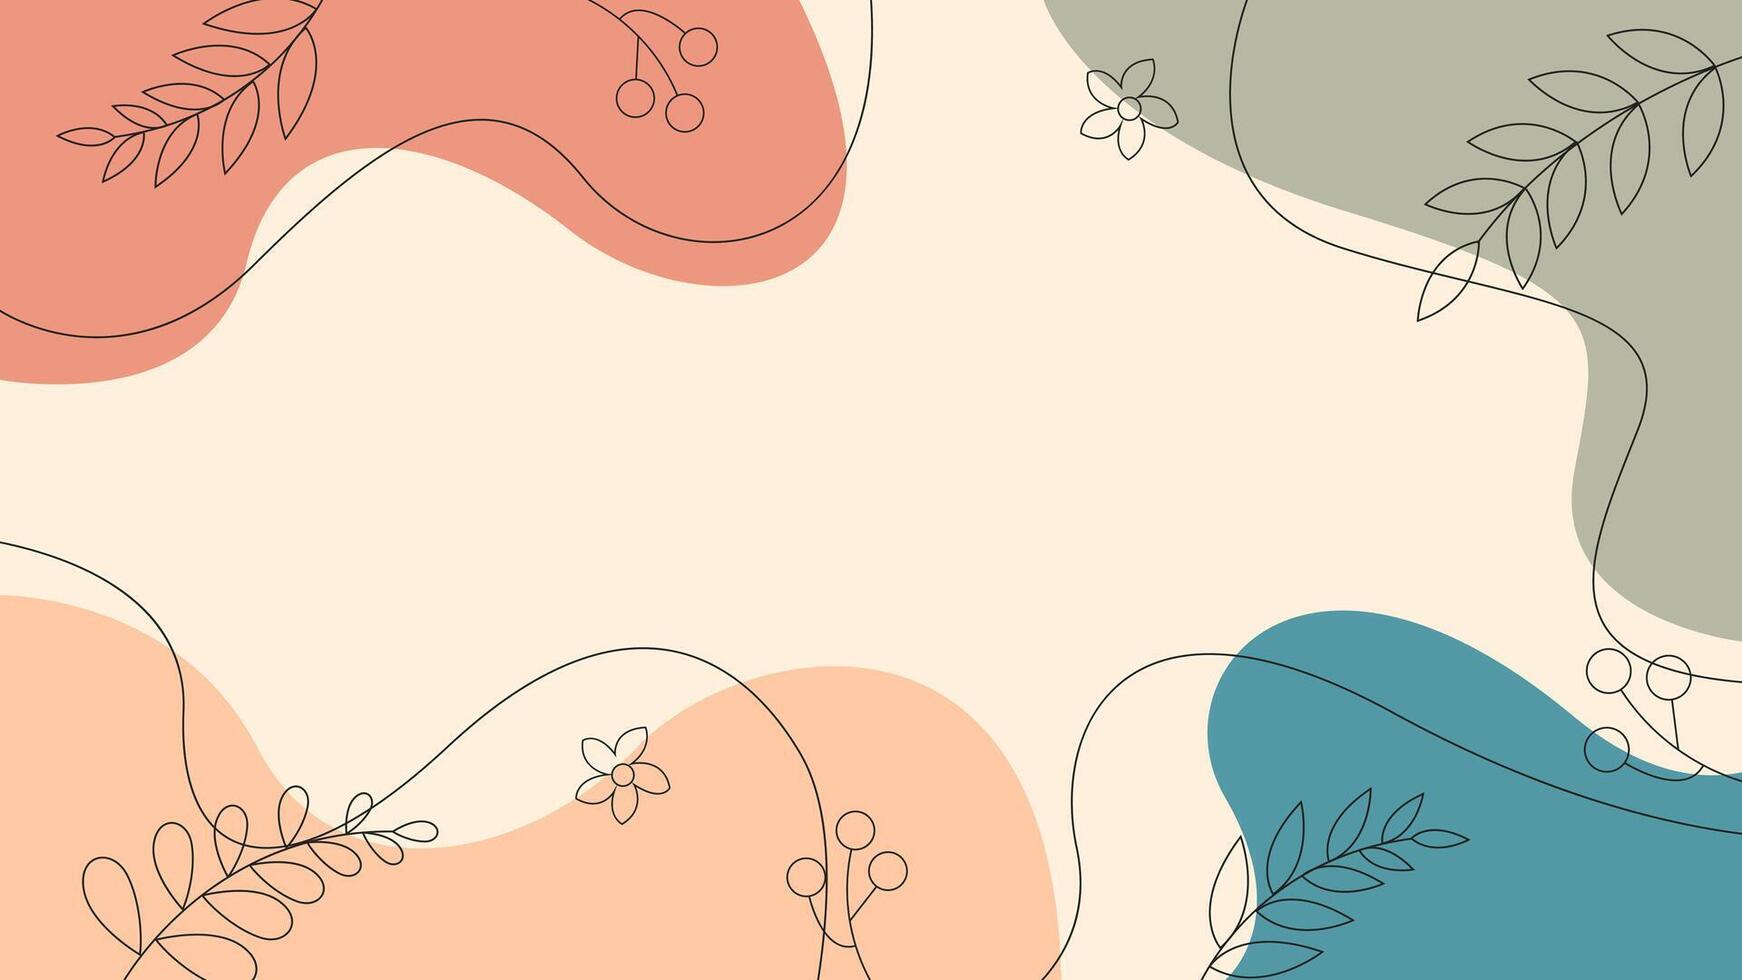 Minimalist floral abstract background. Contemporary collage with organic shapes and lines in pastel colors. Vector Illustration for covers, banners, posters, templates, and others